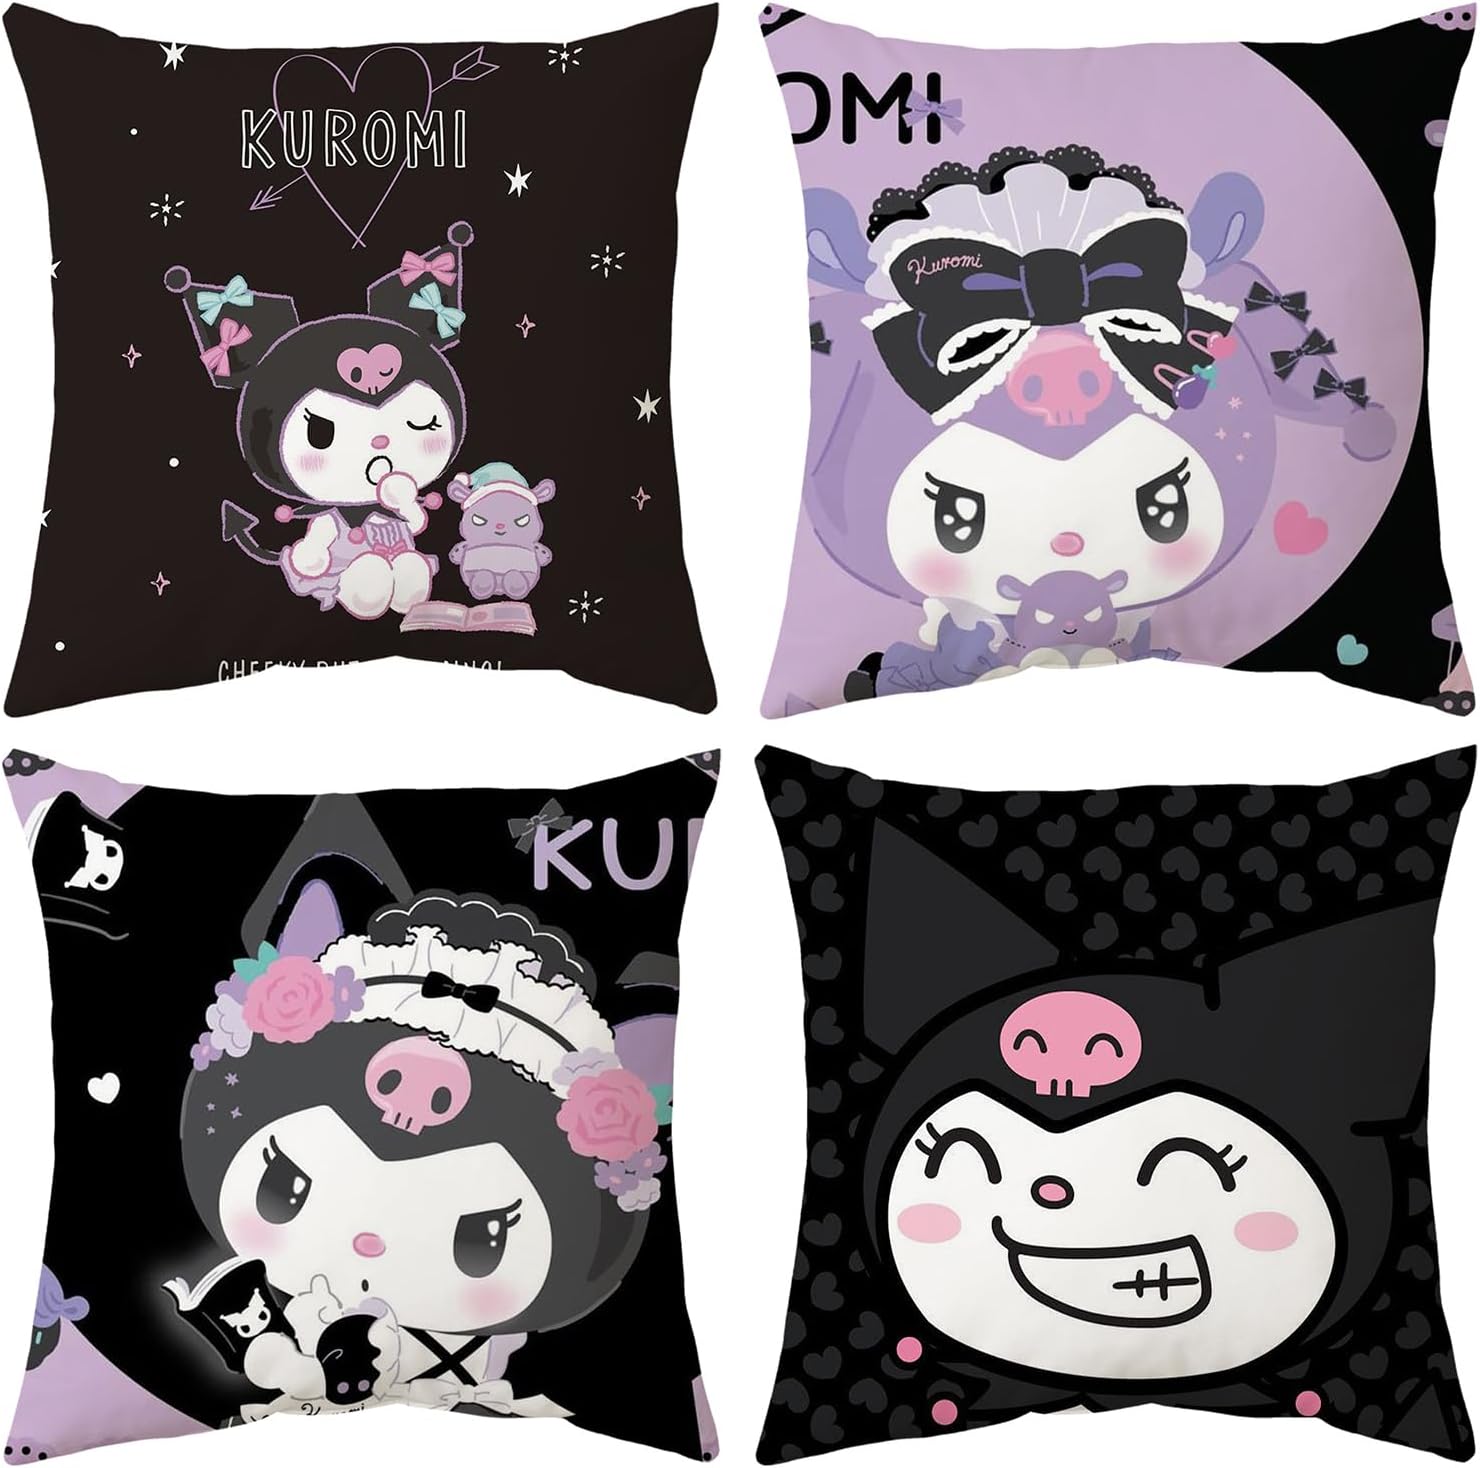 Kawaii Throw Pillow Covers Set of 4, Cute Cartoon Anime Decorative Pillows Covers for Bed and Couch/Sofa, 18x18 Inch Pillow Cases for Bedroom and Living Room (A)